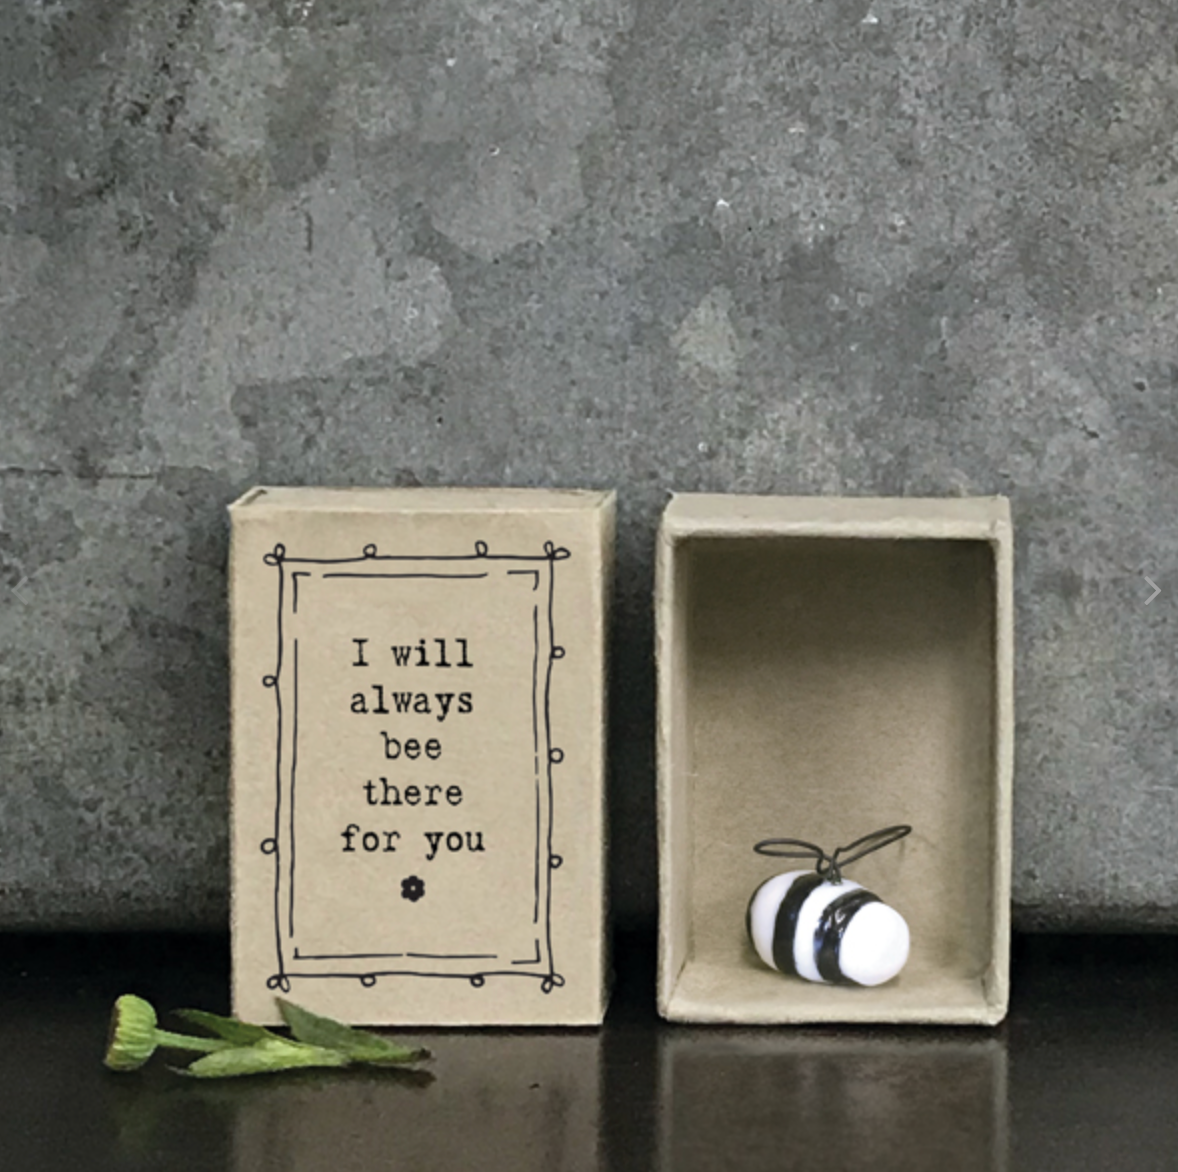 Small black and white porcelain bumble bee sitting in a small Kraft box that says 'I will always bee there fore you'. Small green flower sits to the side.